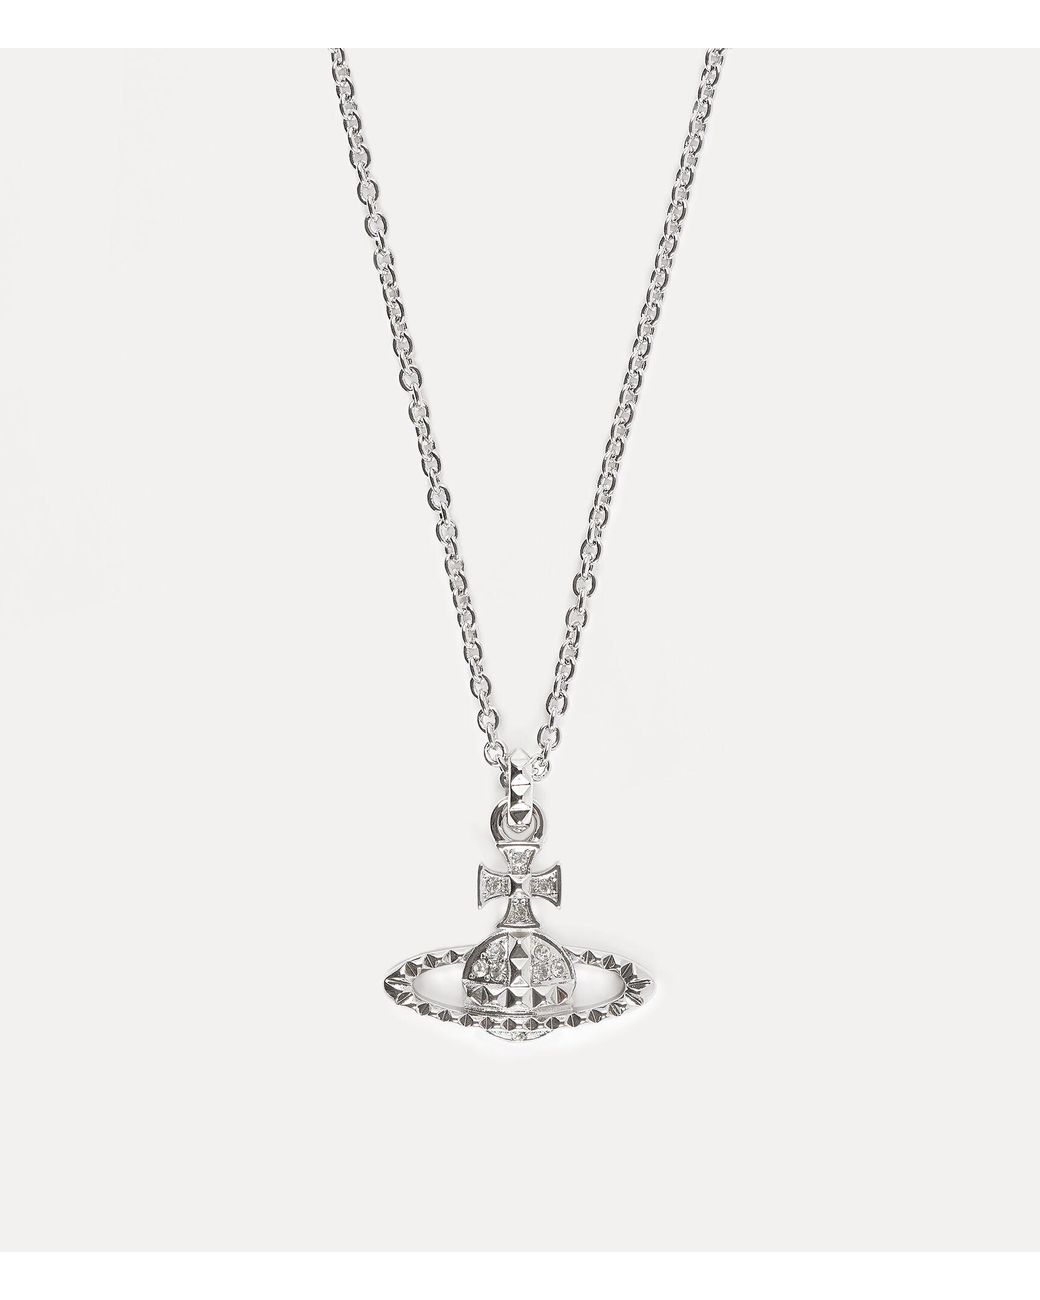 Vivienne Westwood Mayfair Bas Relief Pendant Necklace in Silver ...